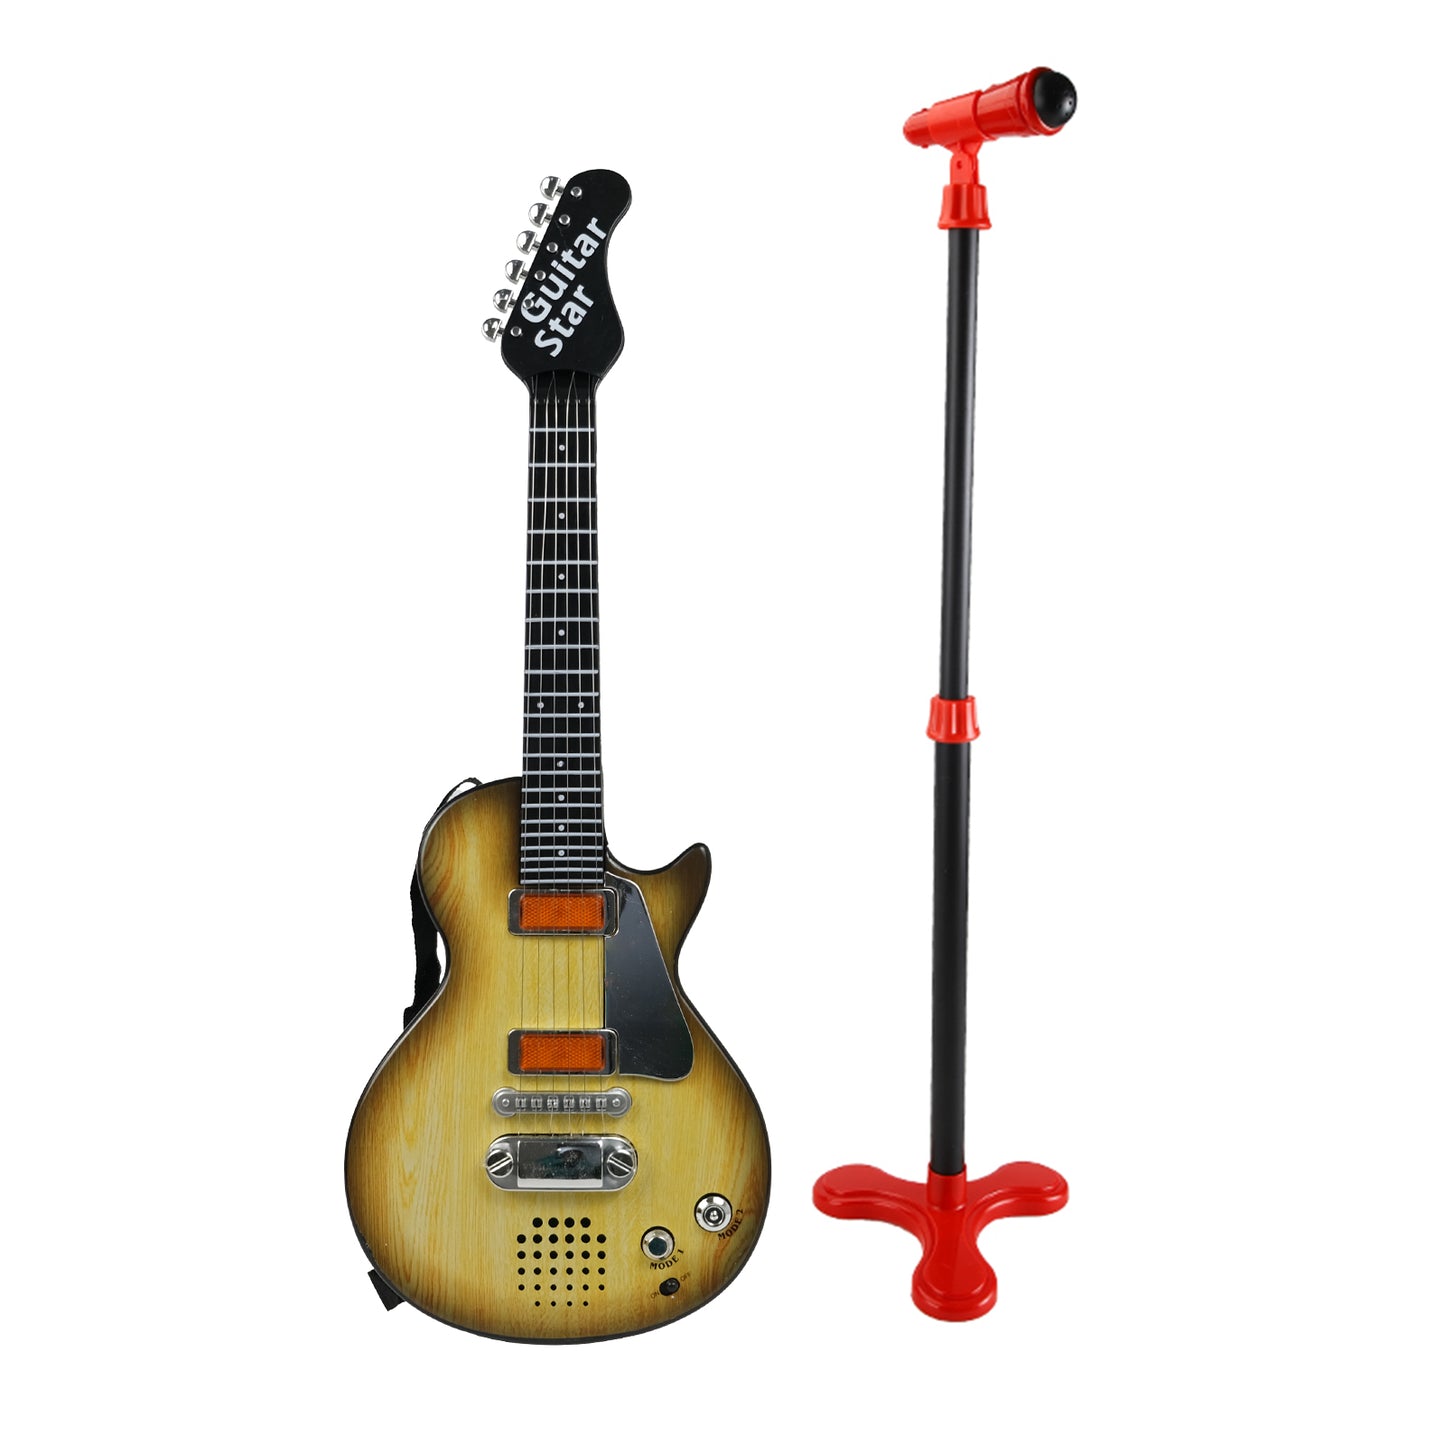 AOQIMITENJOY Musical Instrument Electronic Guitar Toys with Vertical Micphone LED Lighting Karaoke Birthday Gifts for Boys and Girls 3 Year Old+ HK-9080C